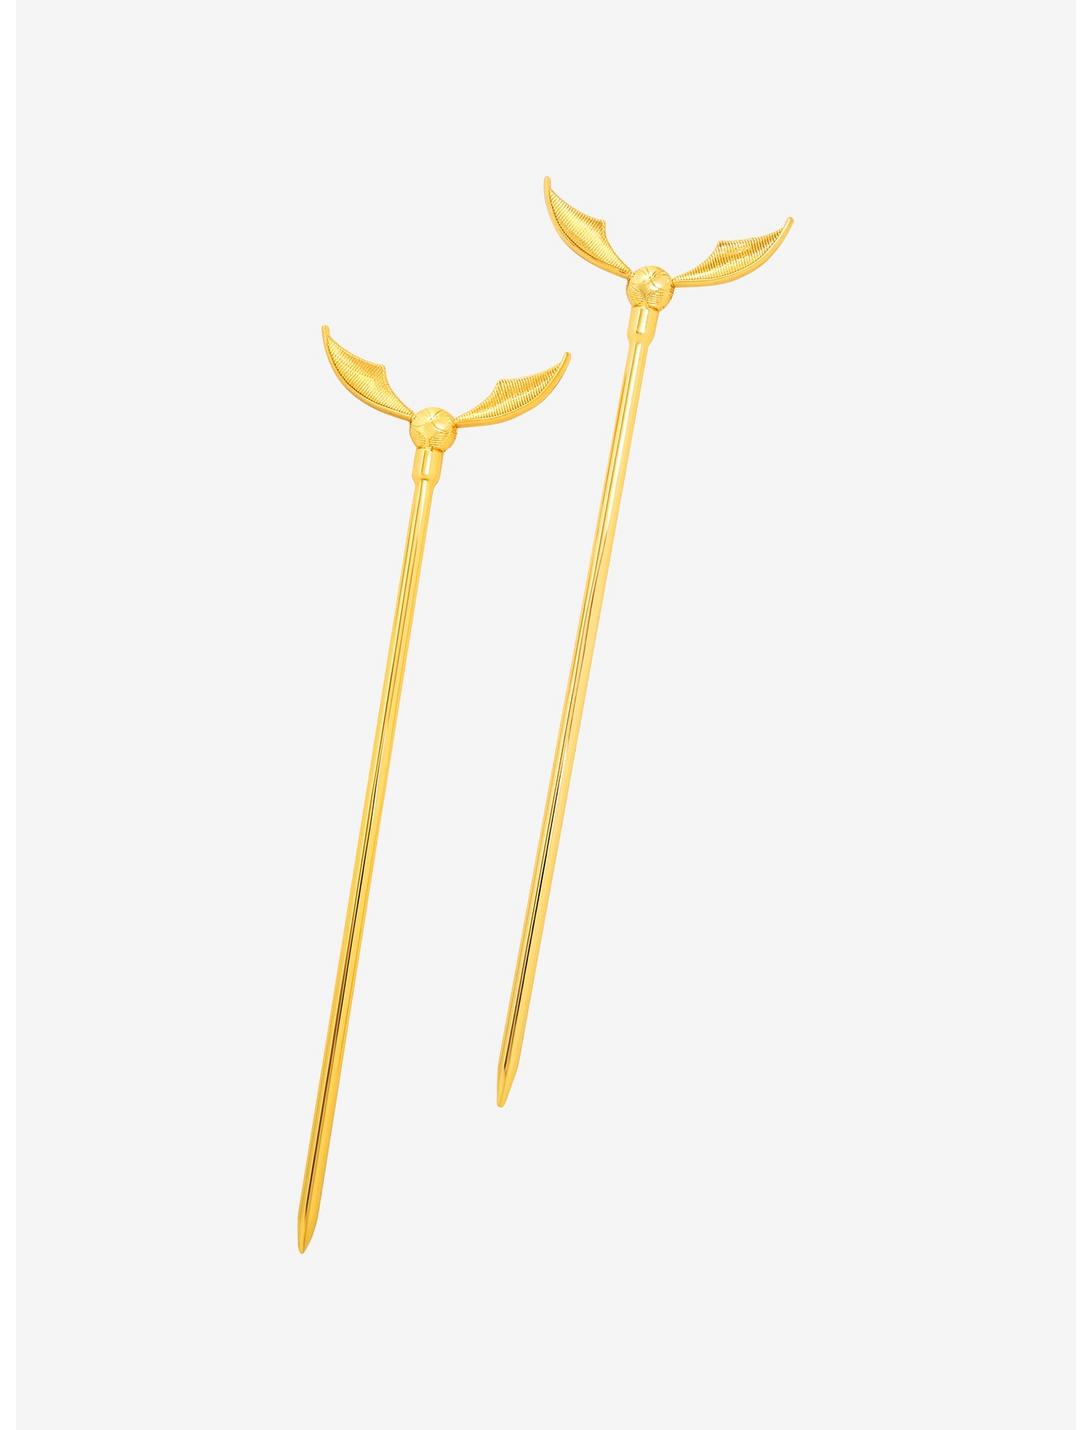 Harry Potter Golden Snitch Hair Sticks - BoxLunch Exclusive, , hi-res